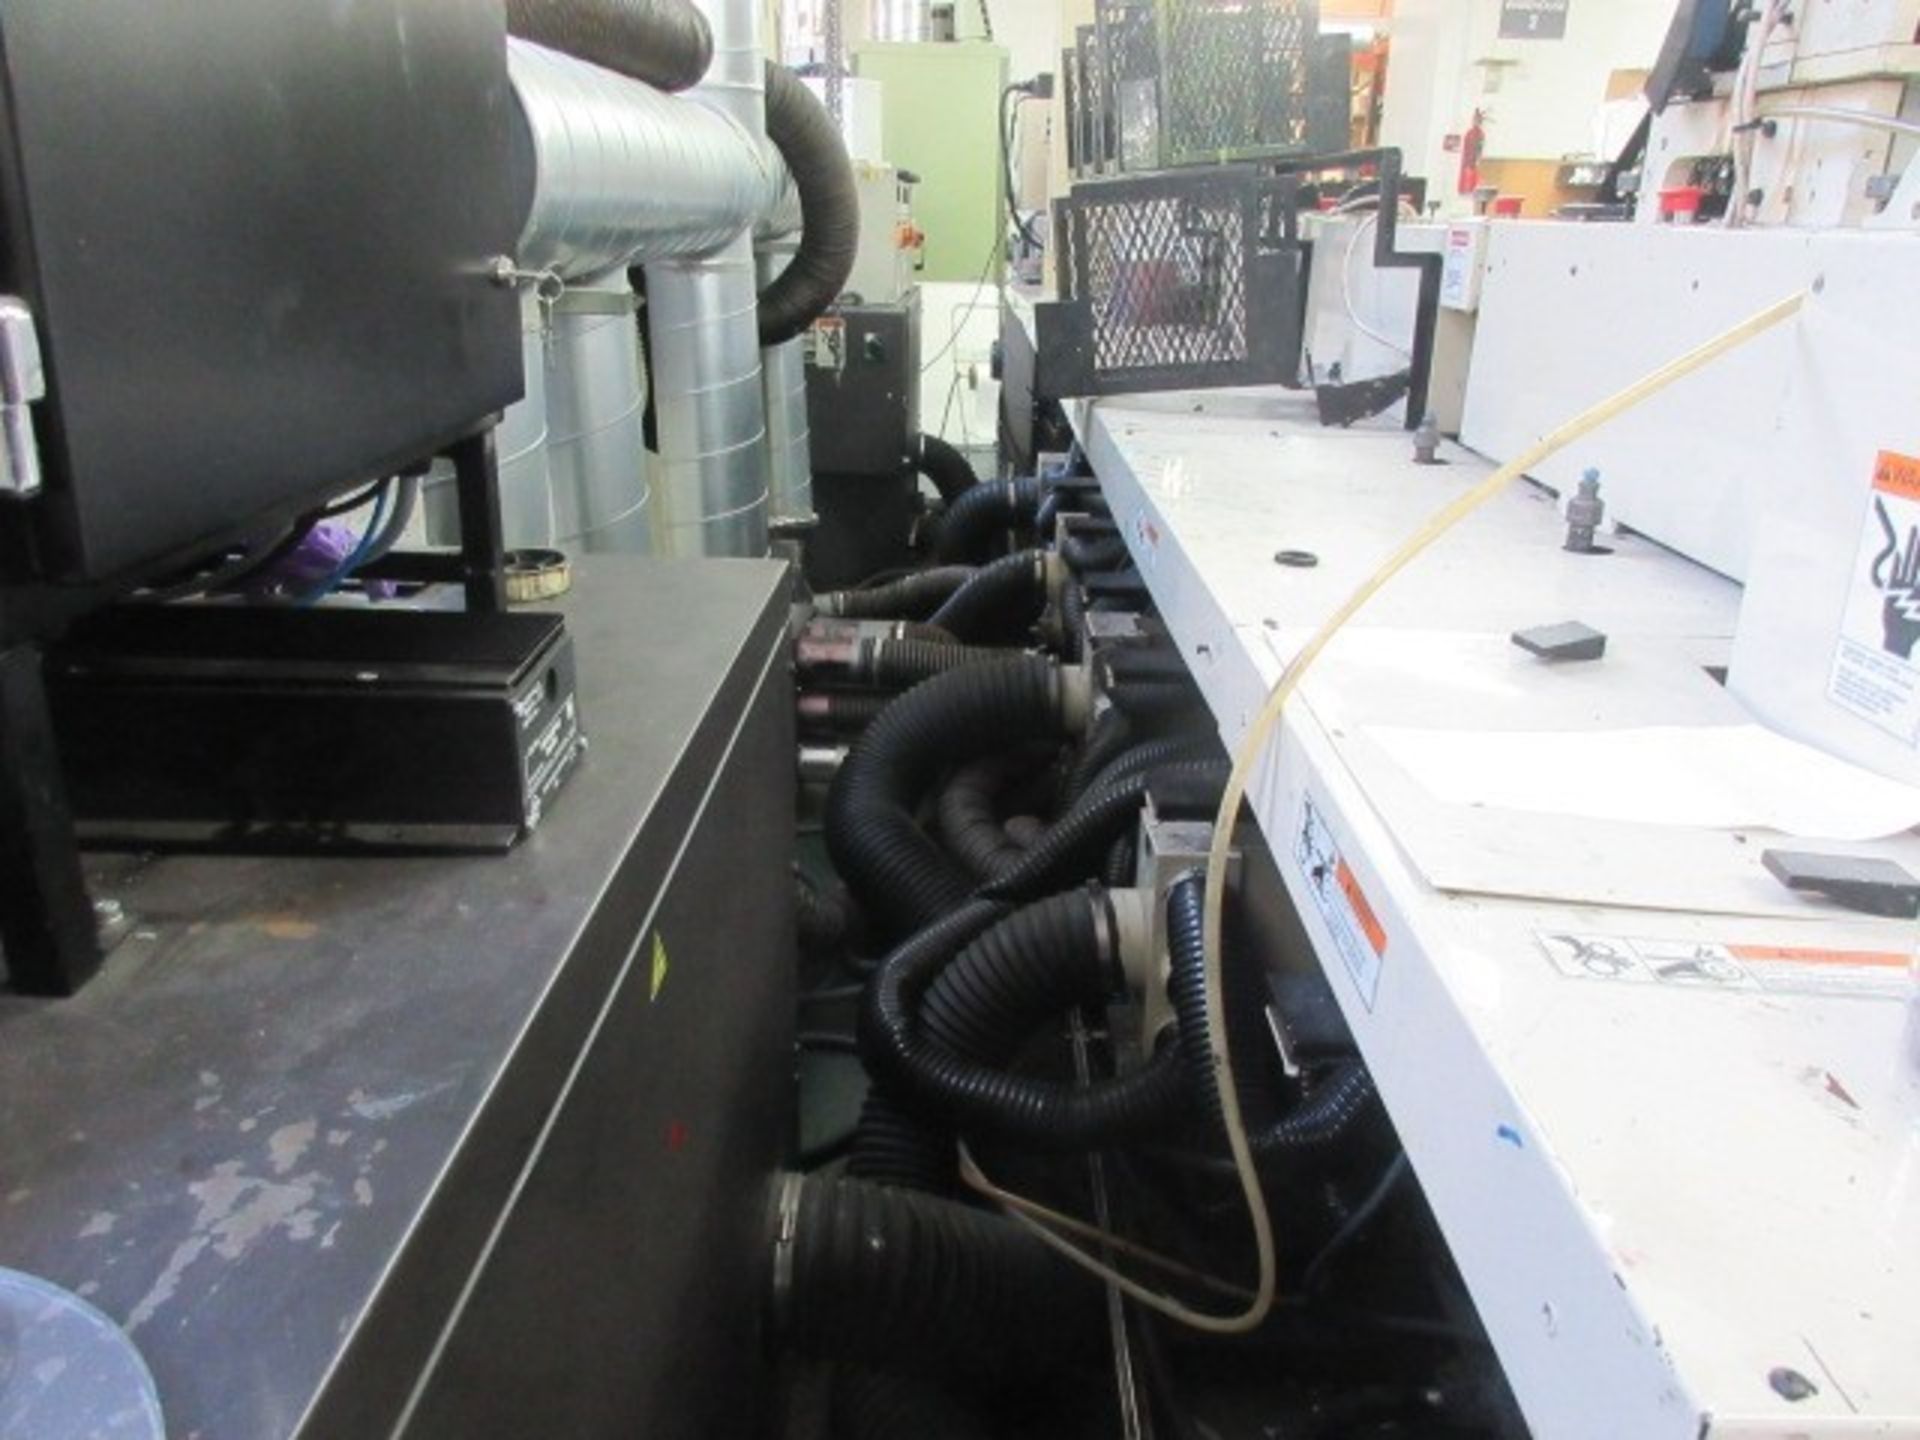 Mark Andy 2200-10F 10” 8 colour flexographic label printing press. Serial no: 1260086 (2002) - Image 376 of 383